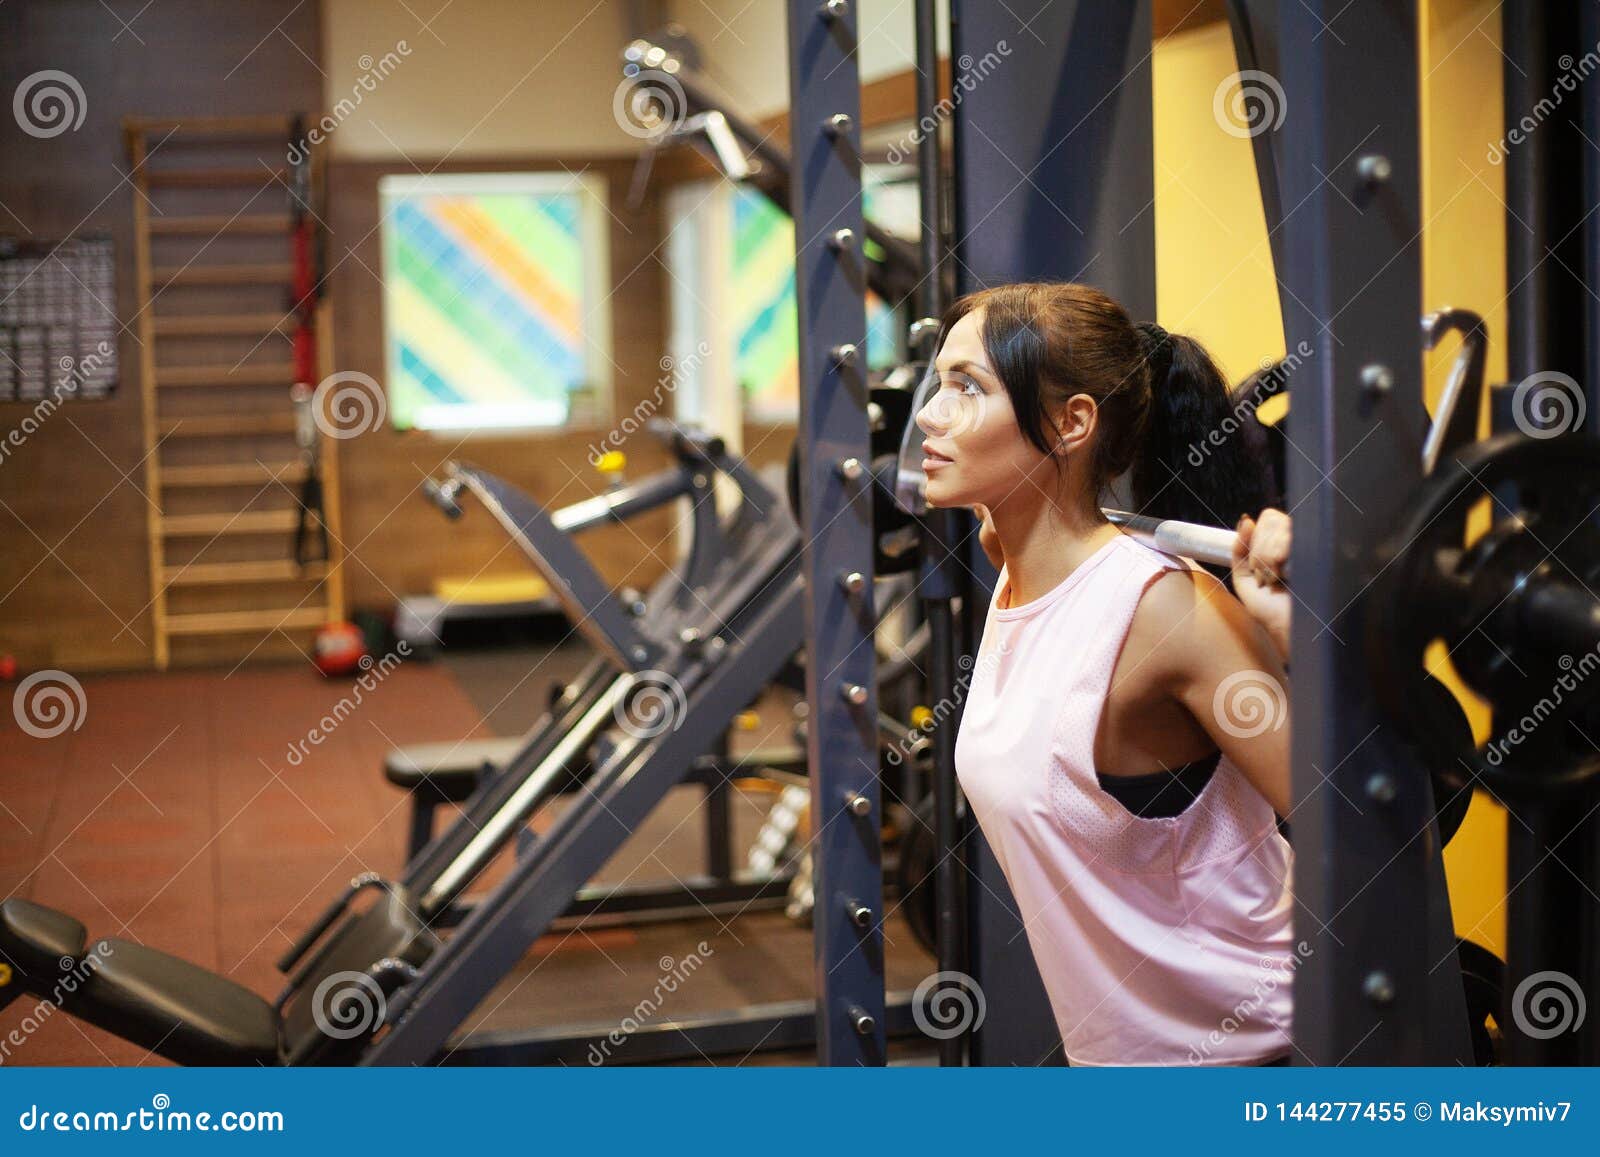 Fitness Girl Athletic Woman Working Out Barbell Gym Beautiful